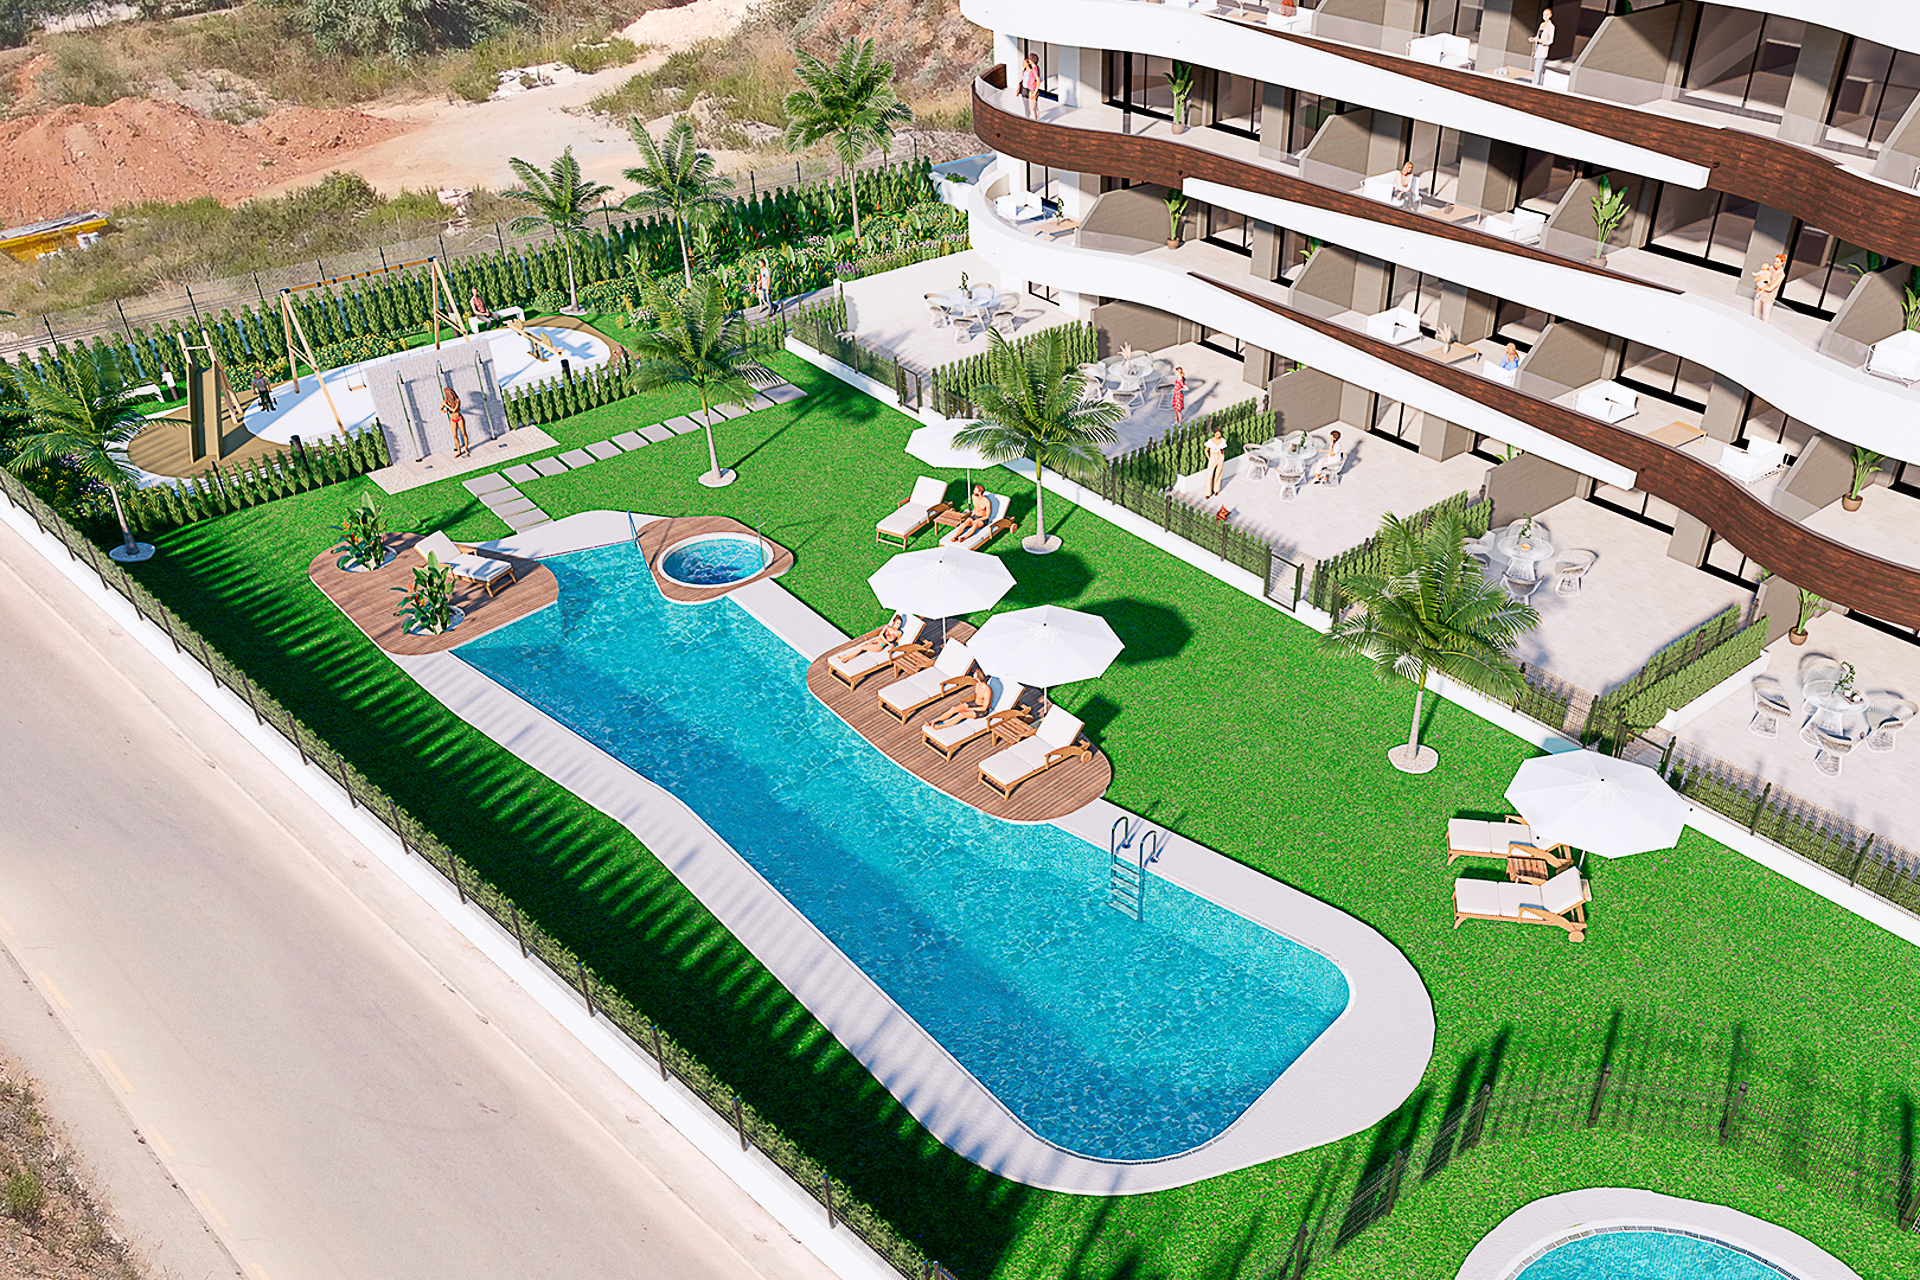 Exclusive new construction: 2nd floor flat with 2 bedrooms, south-balcony and community pool, 07560 Sa Coma (Spain), Apartment